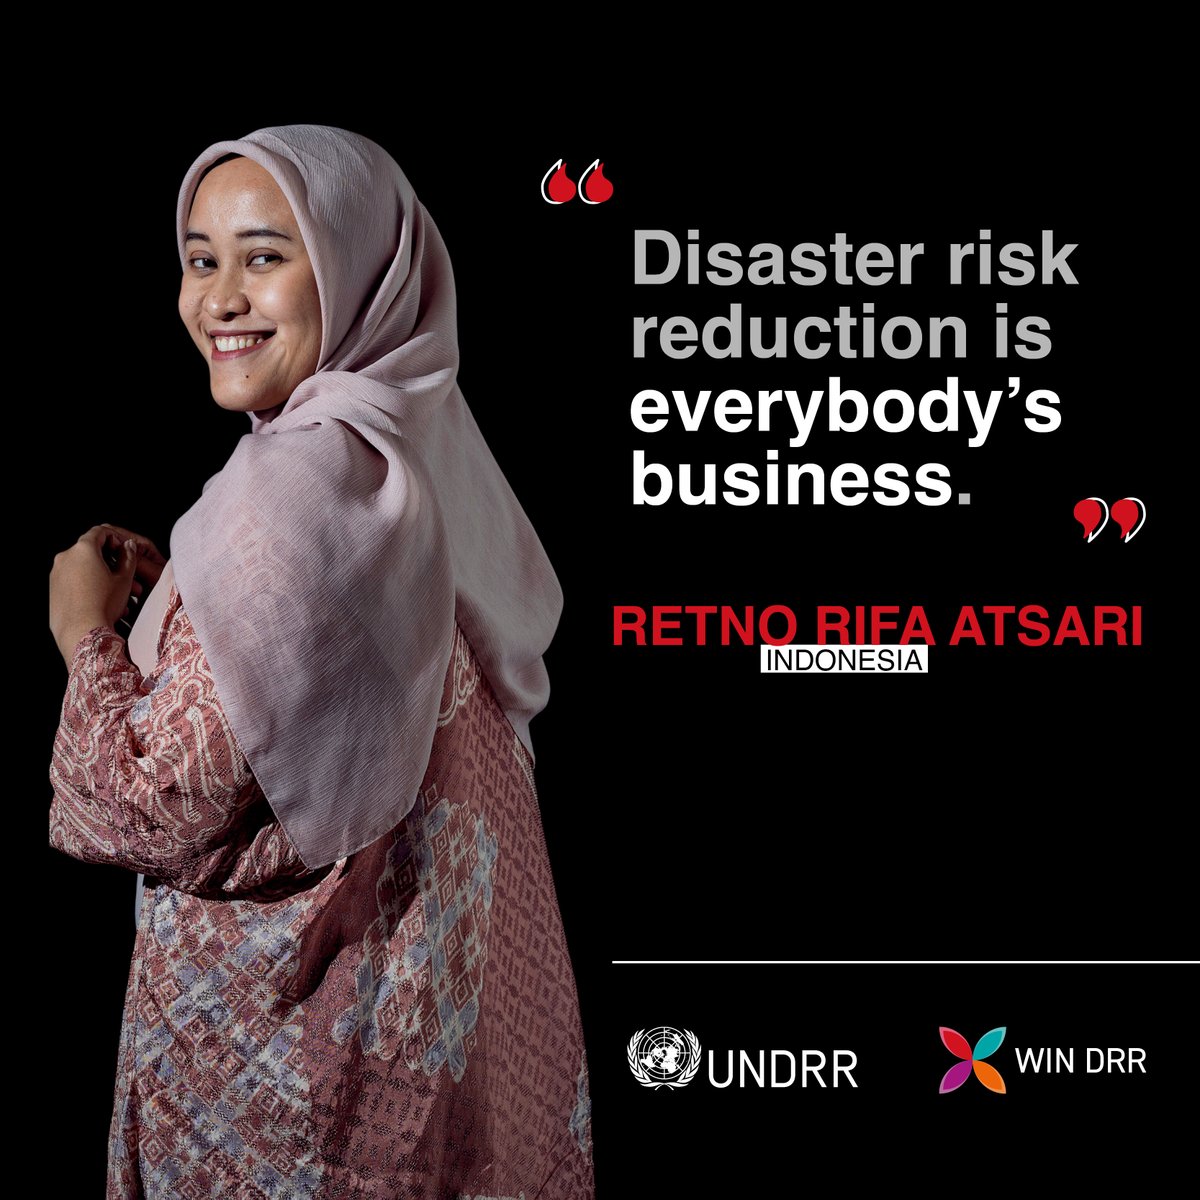 'I am happy that my team and I can create a supporting environment for women to work in DRR,' says Retno Rifa Atsari, Vice-Principal and Co-founder of CARI, a disaster knowledge management platform in Indonesia. Read Retno's's story ➡️ ow.ly/5pqS50RAf9U #WINDRR